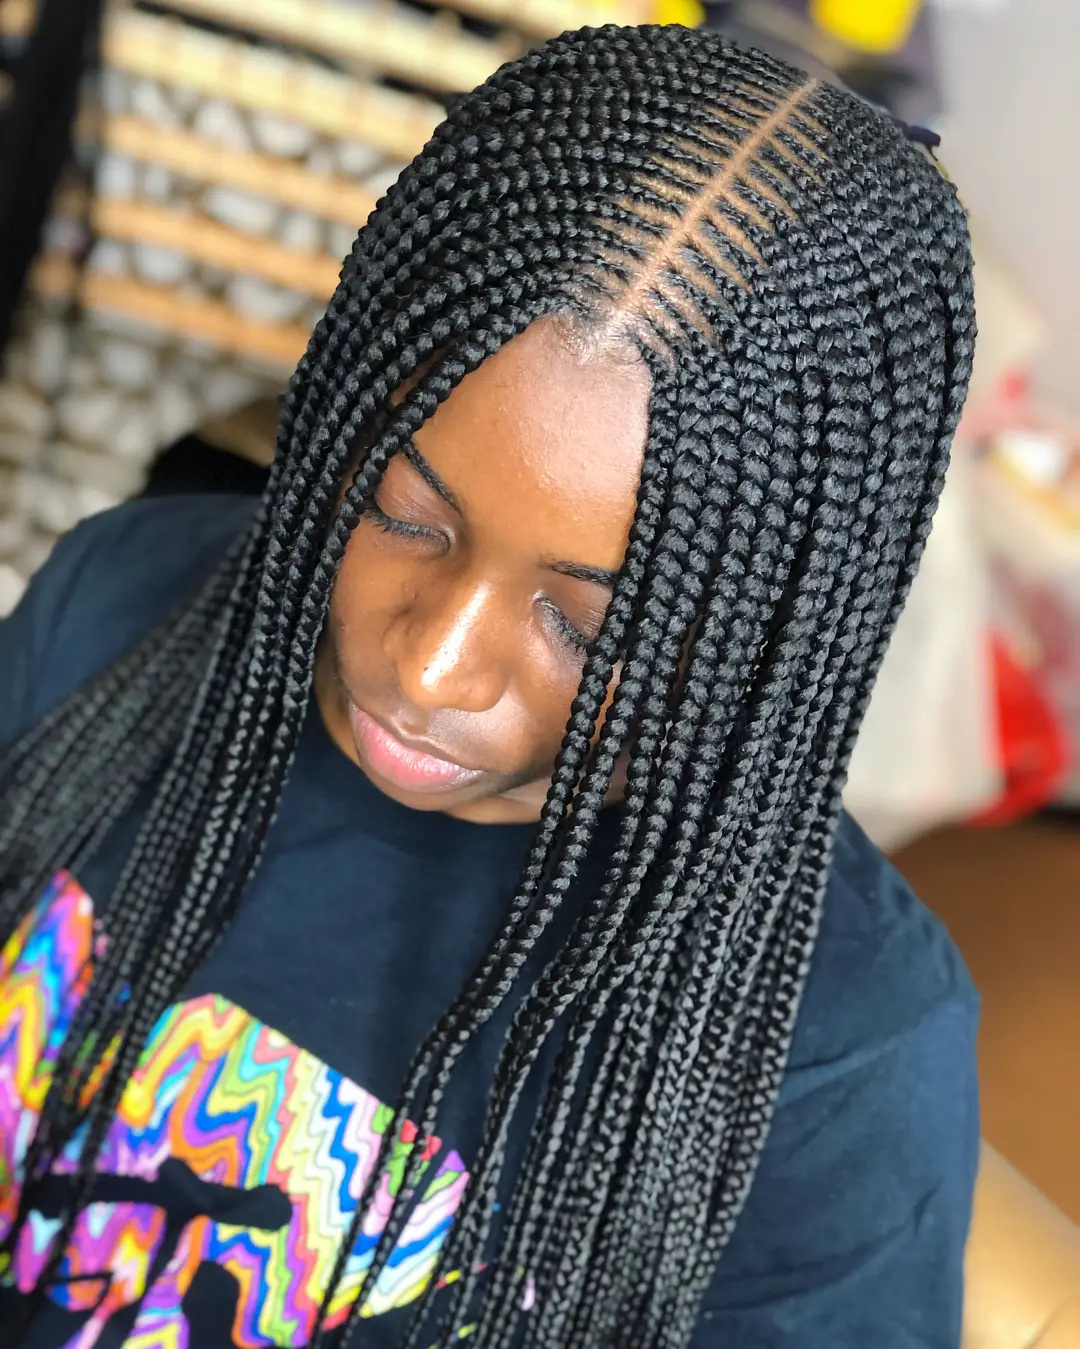 Latest Feed in Braids Styles 2020 to Look Awesome